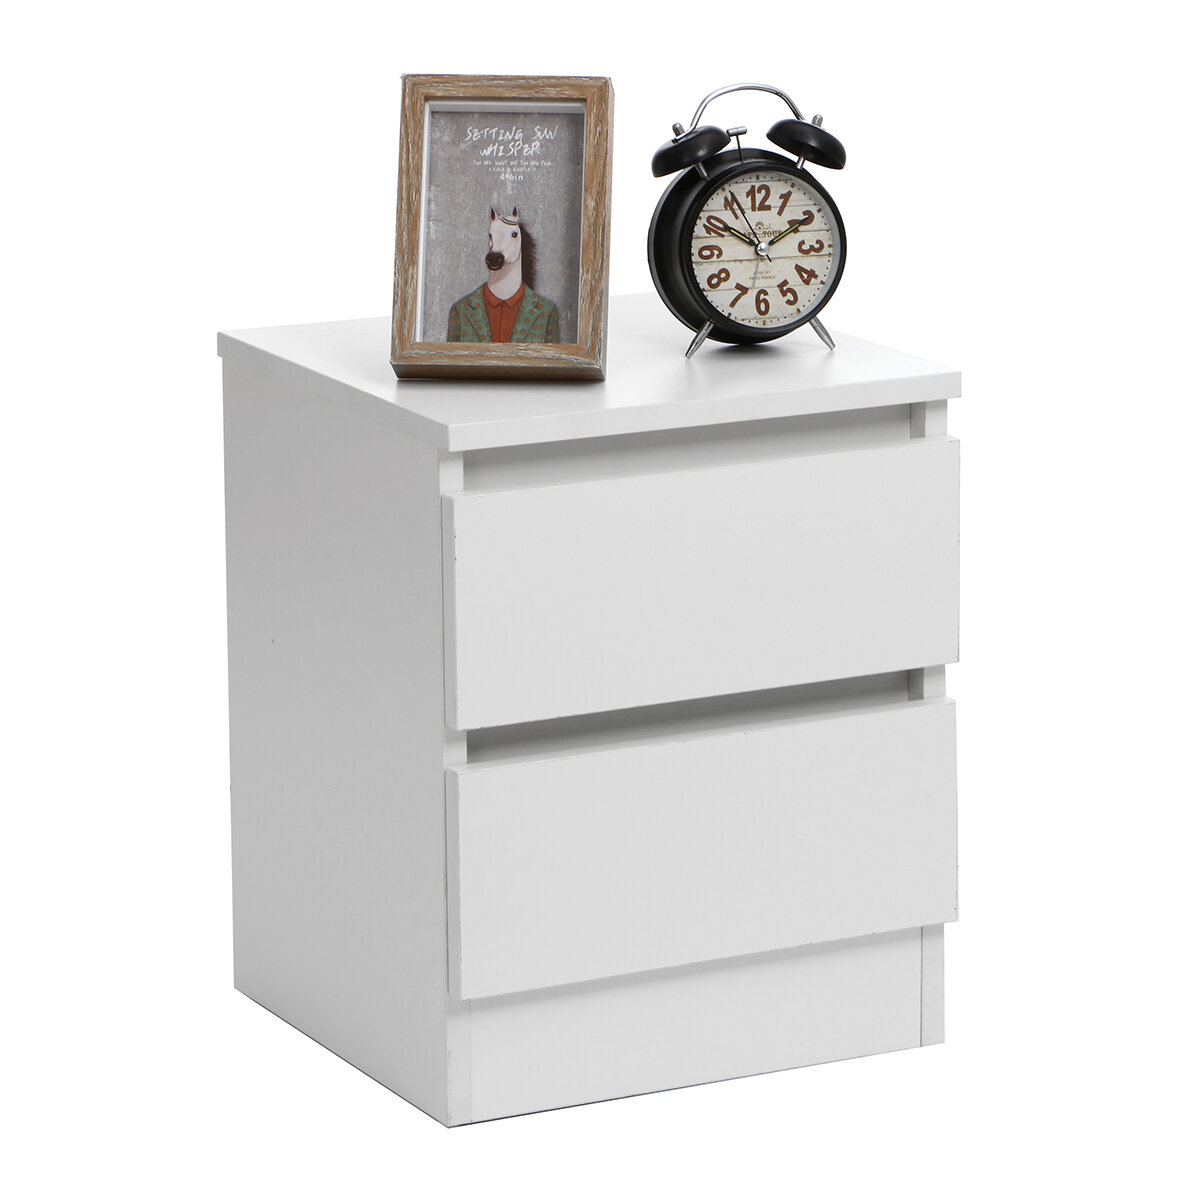 Image of File Cabinets Chest Of Drawers Nightstands Wardrobe Bedside Table Desk Storage With 2 Layer